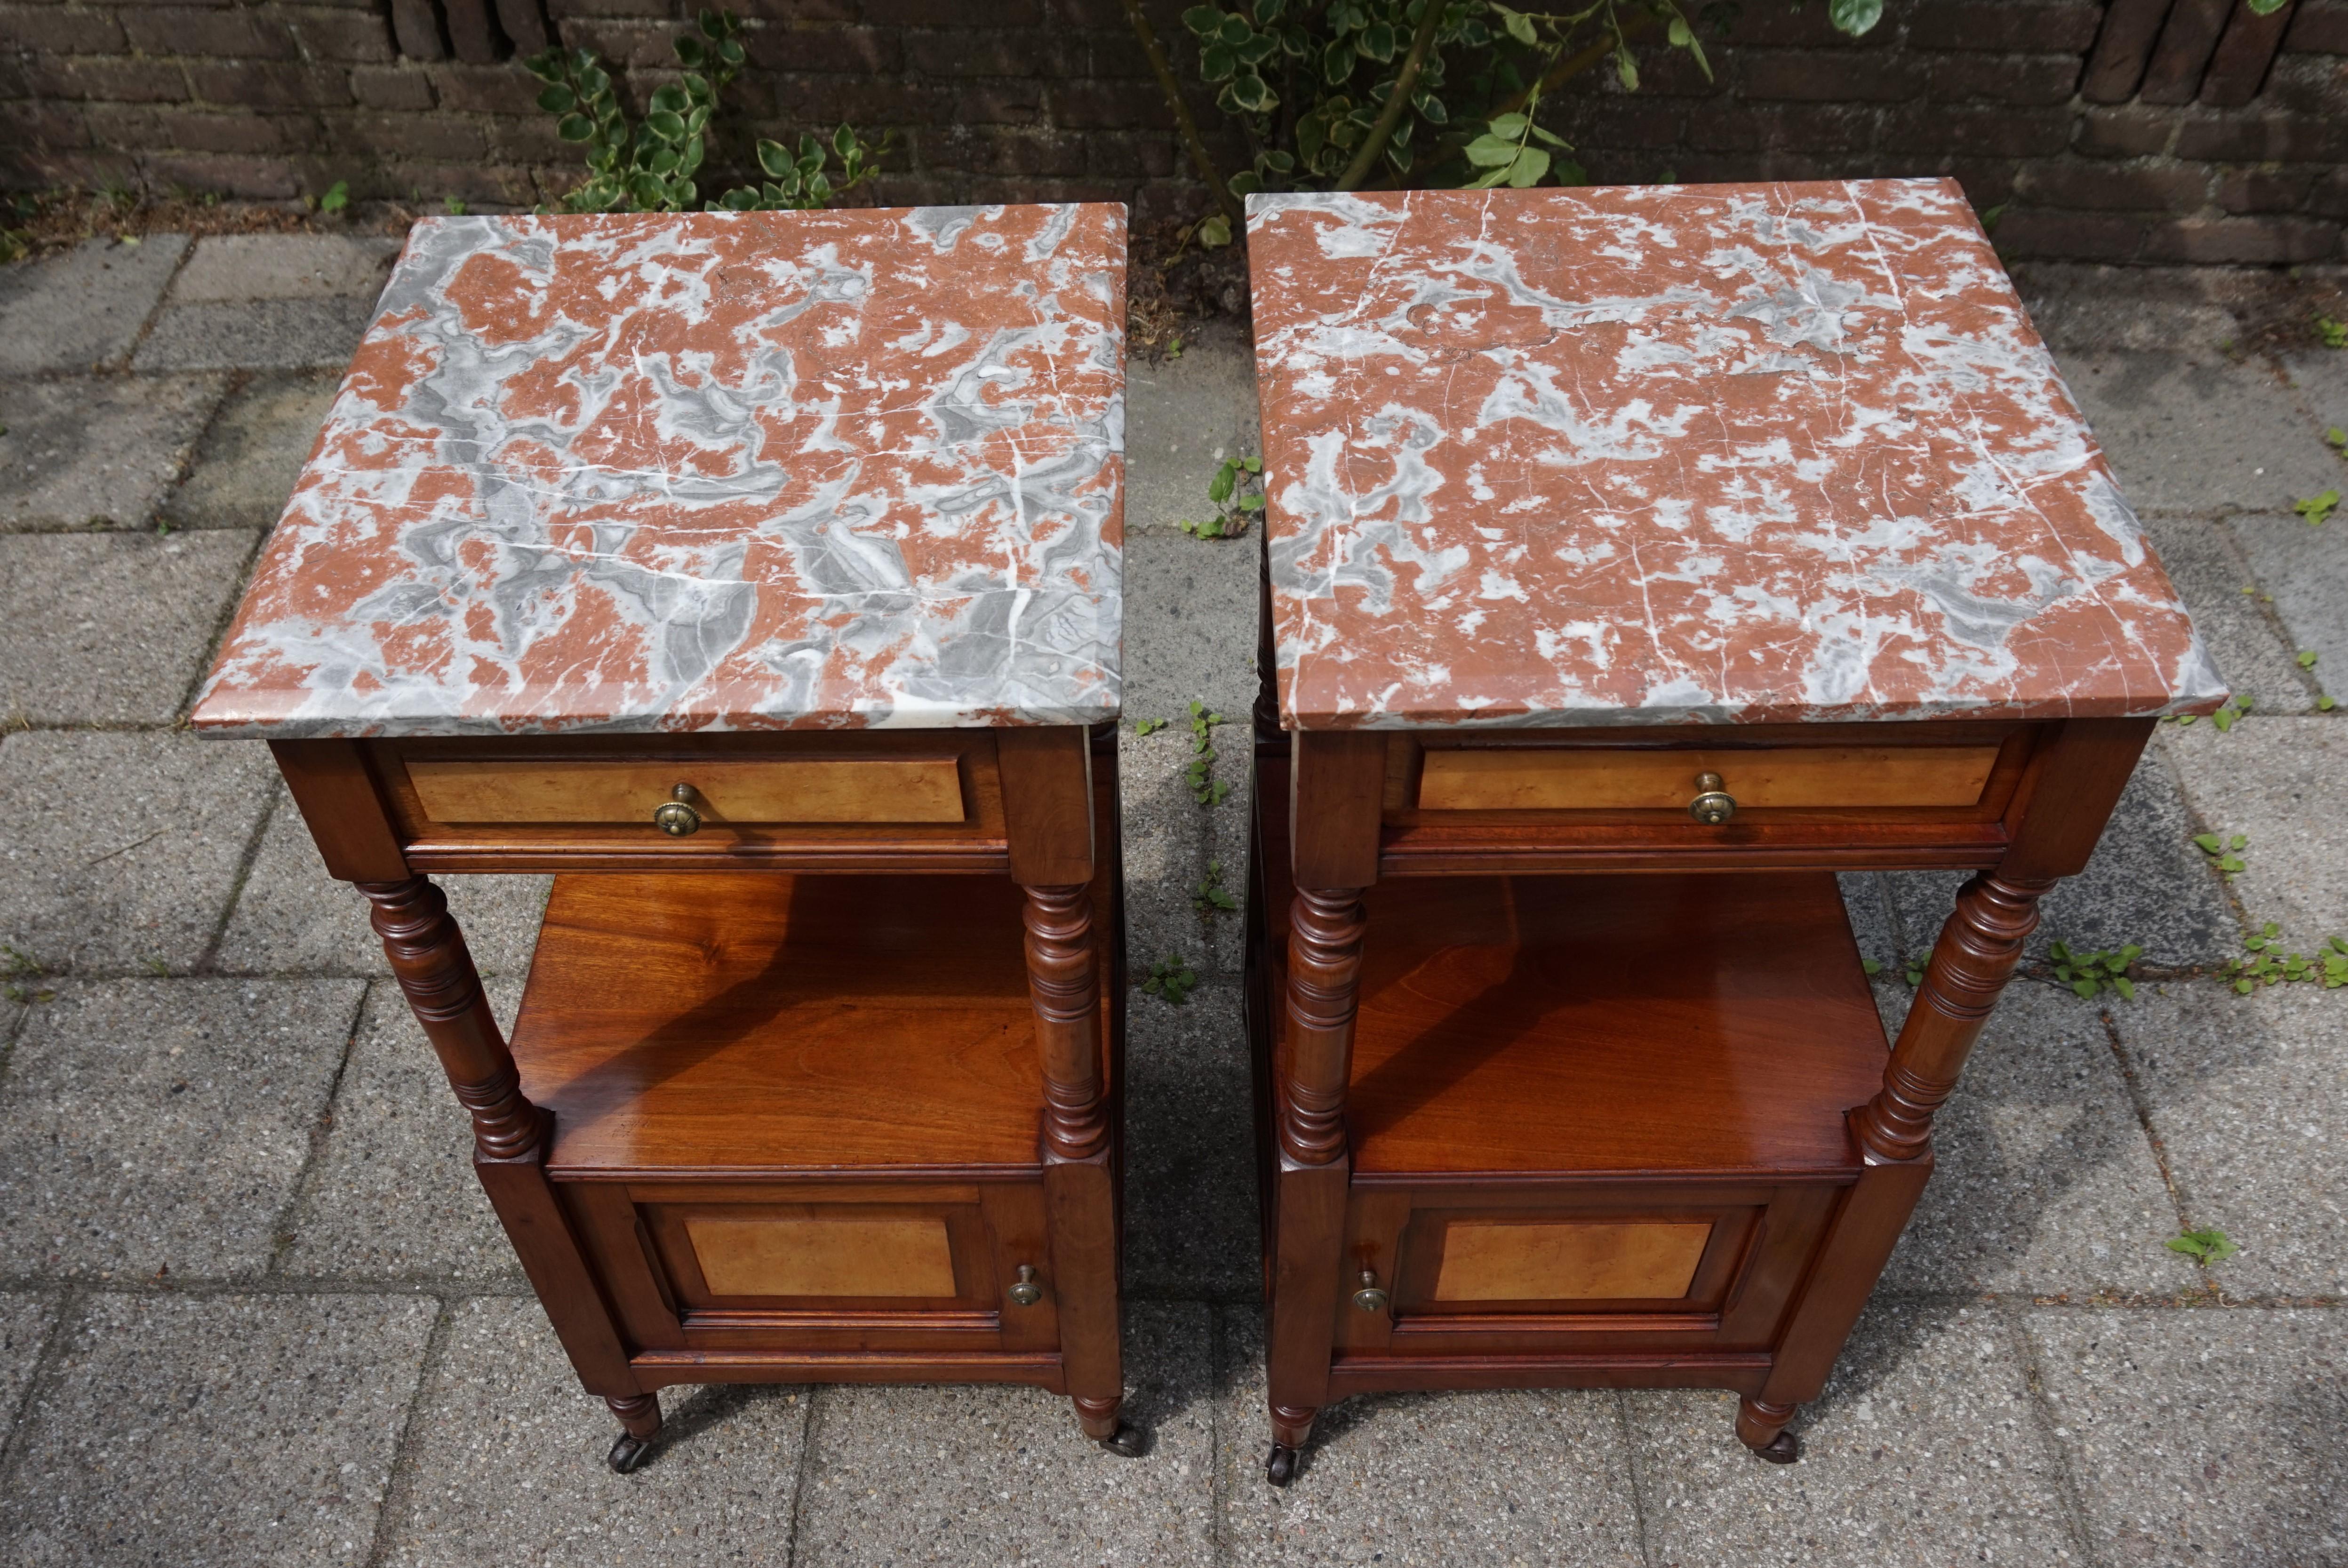 19th Century Antique Pair of Nutwood Nightstands with Bird's-Eye Maple Inlay and Marble Tops For Sale